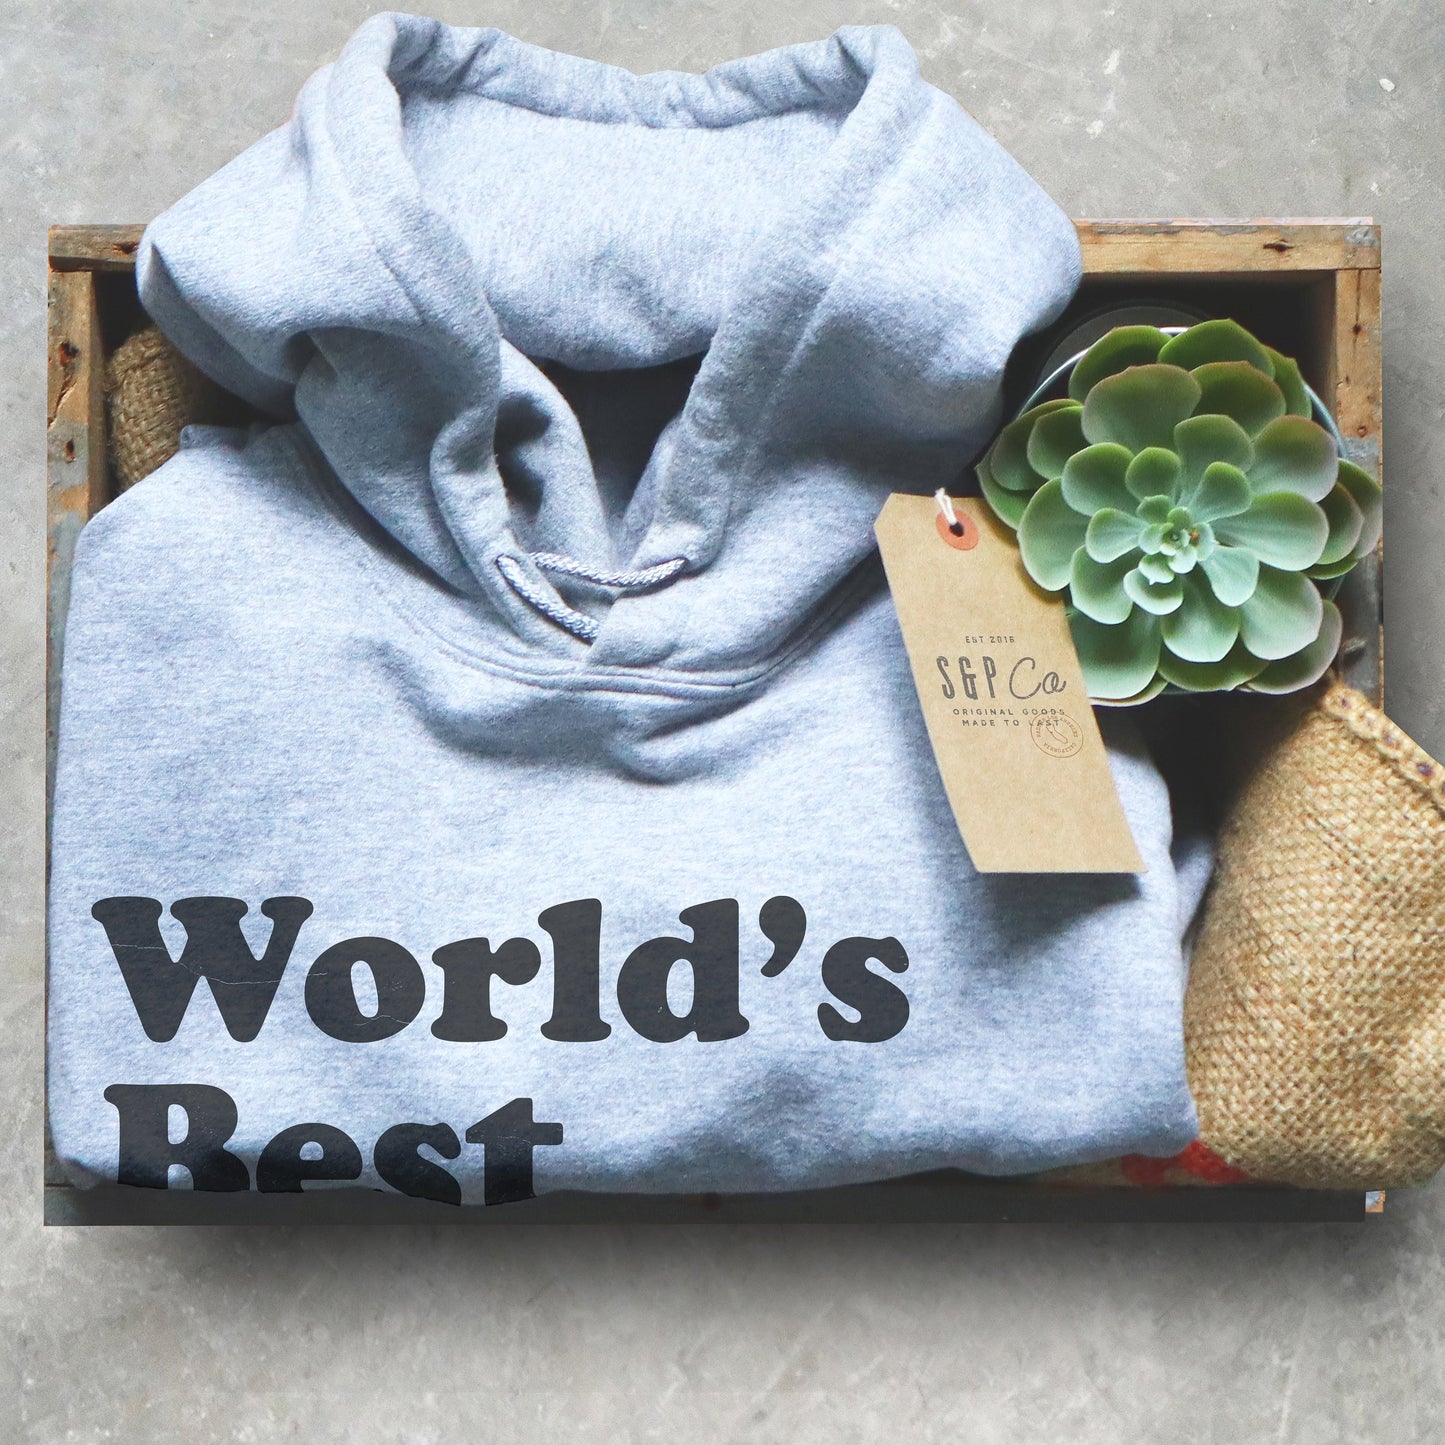 World’s Best Librarian Hoodie - Librarian Shirt, Librarian Gift, Reading Shirts, Book Lover Gift, Book Shirt, Bookworm Gift, End Of School